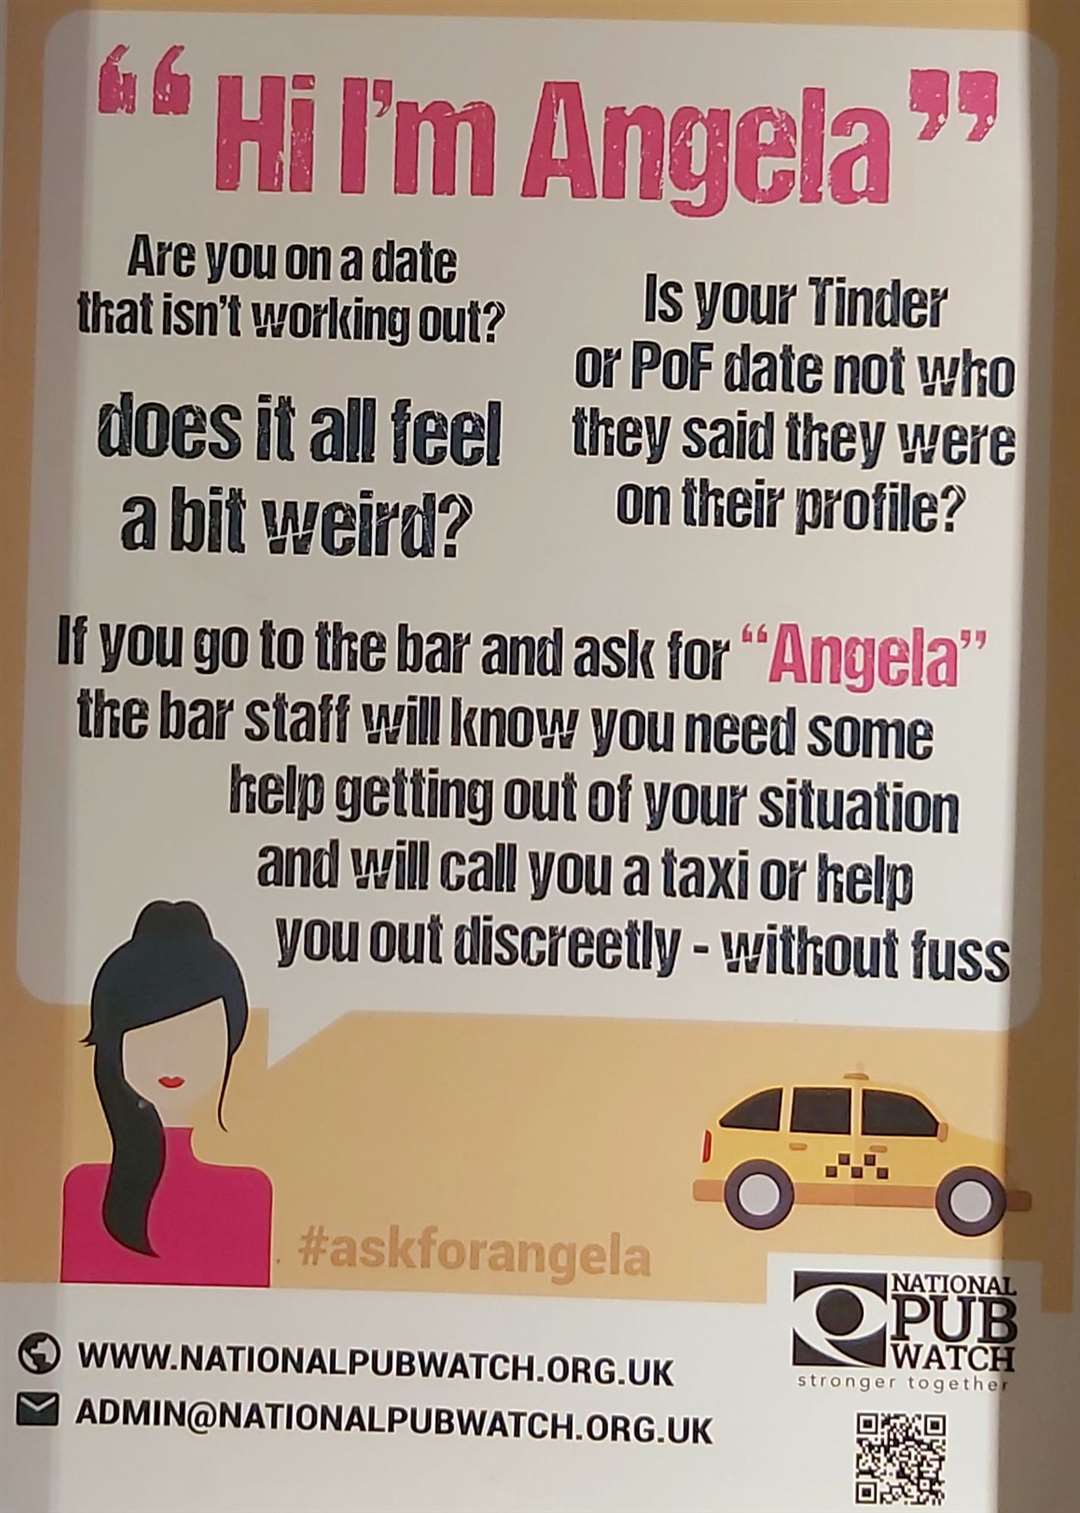 The Ask for Angela scheme means people can ask for help discretely